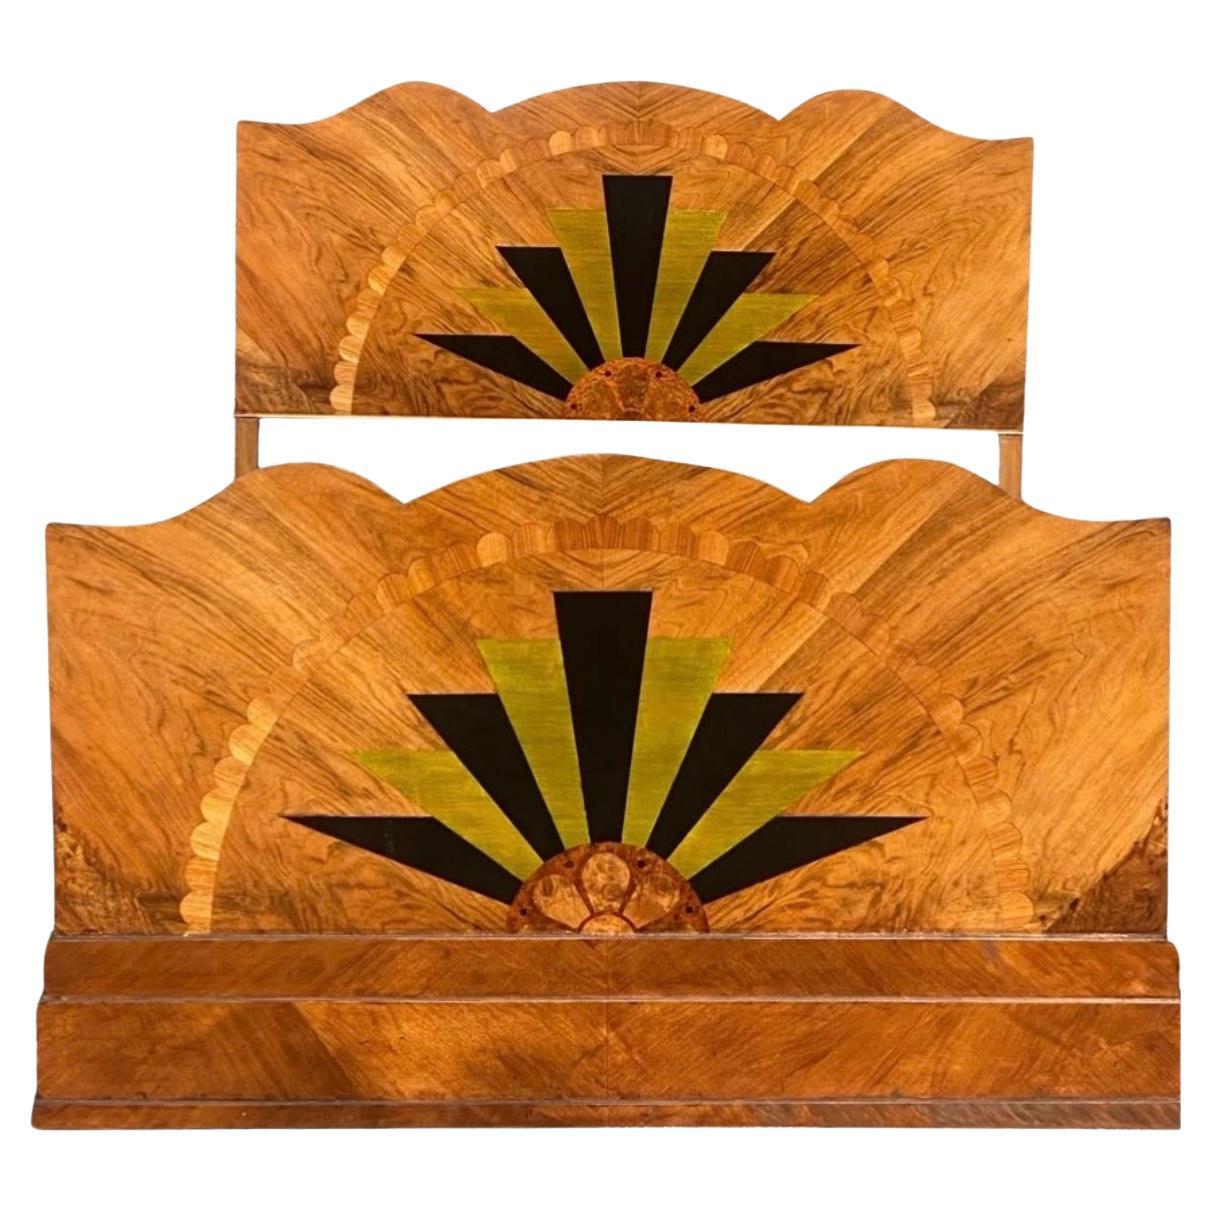 Stunning 1920’s Art Deco Sunray Inlaid Double Bed For Sale